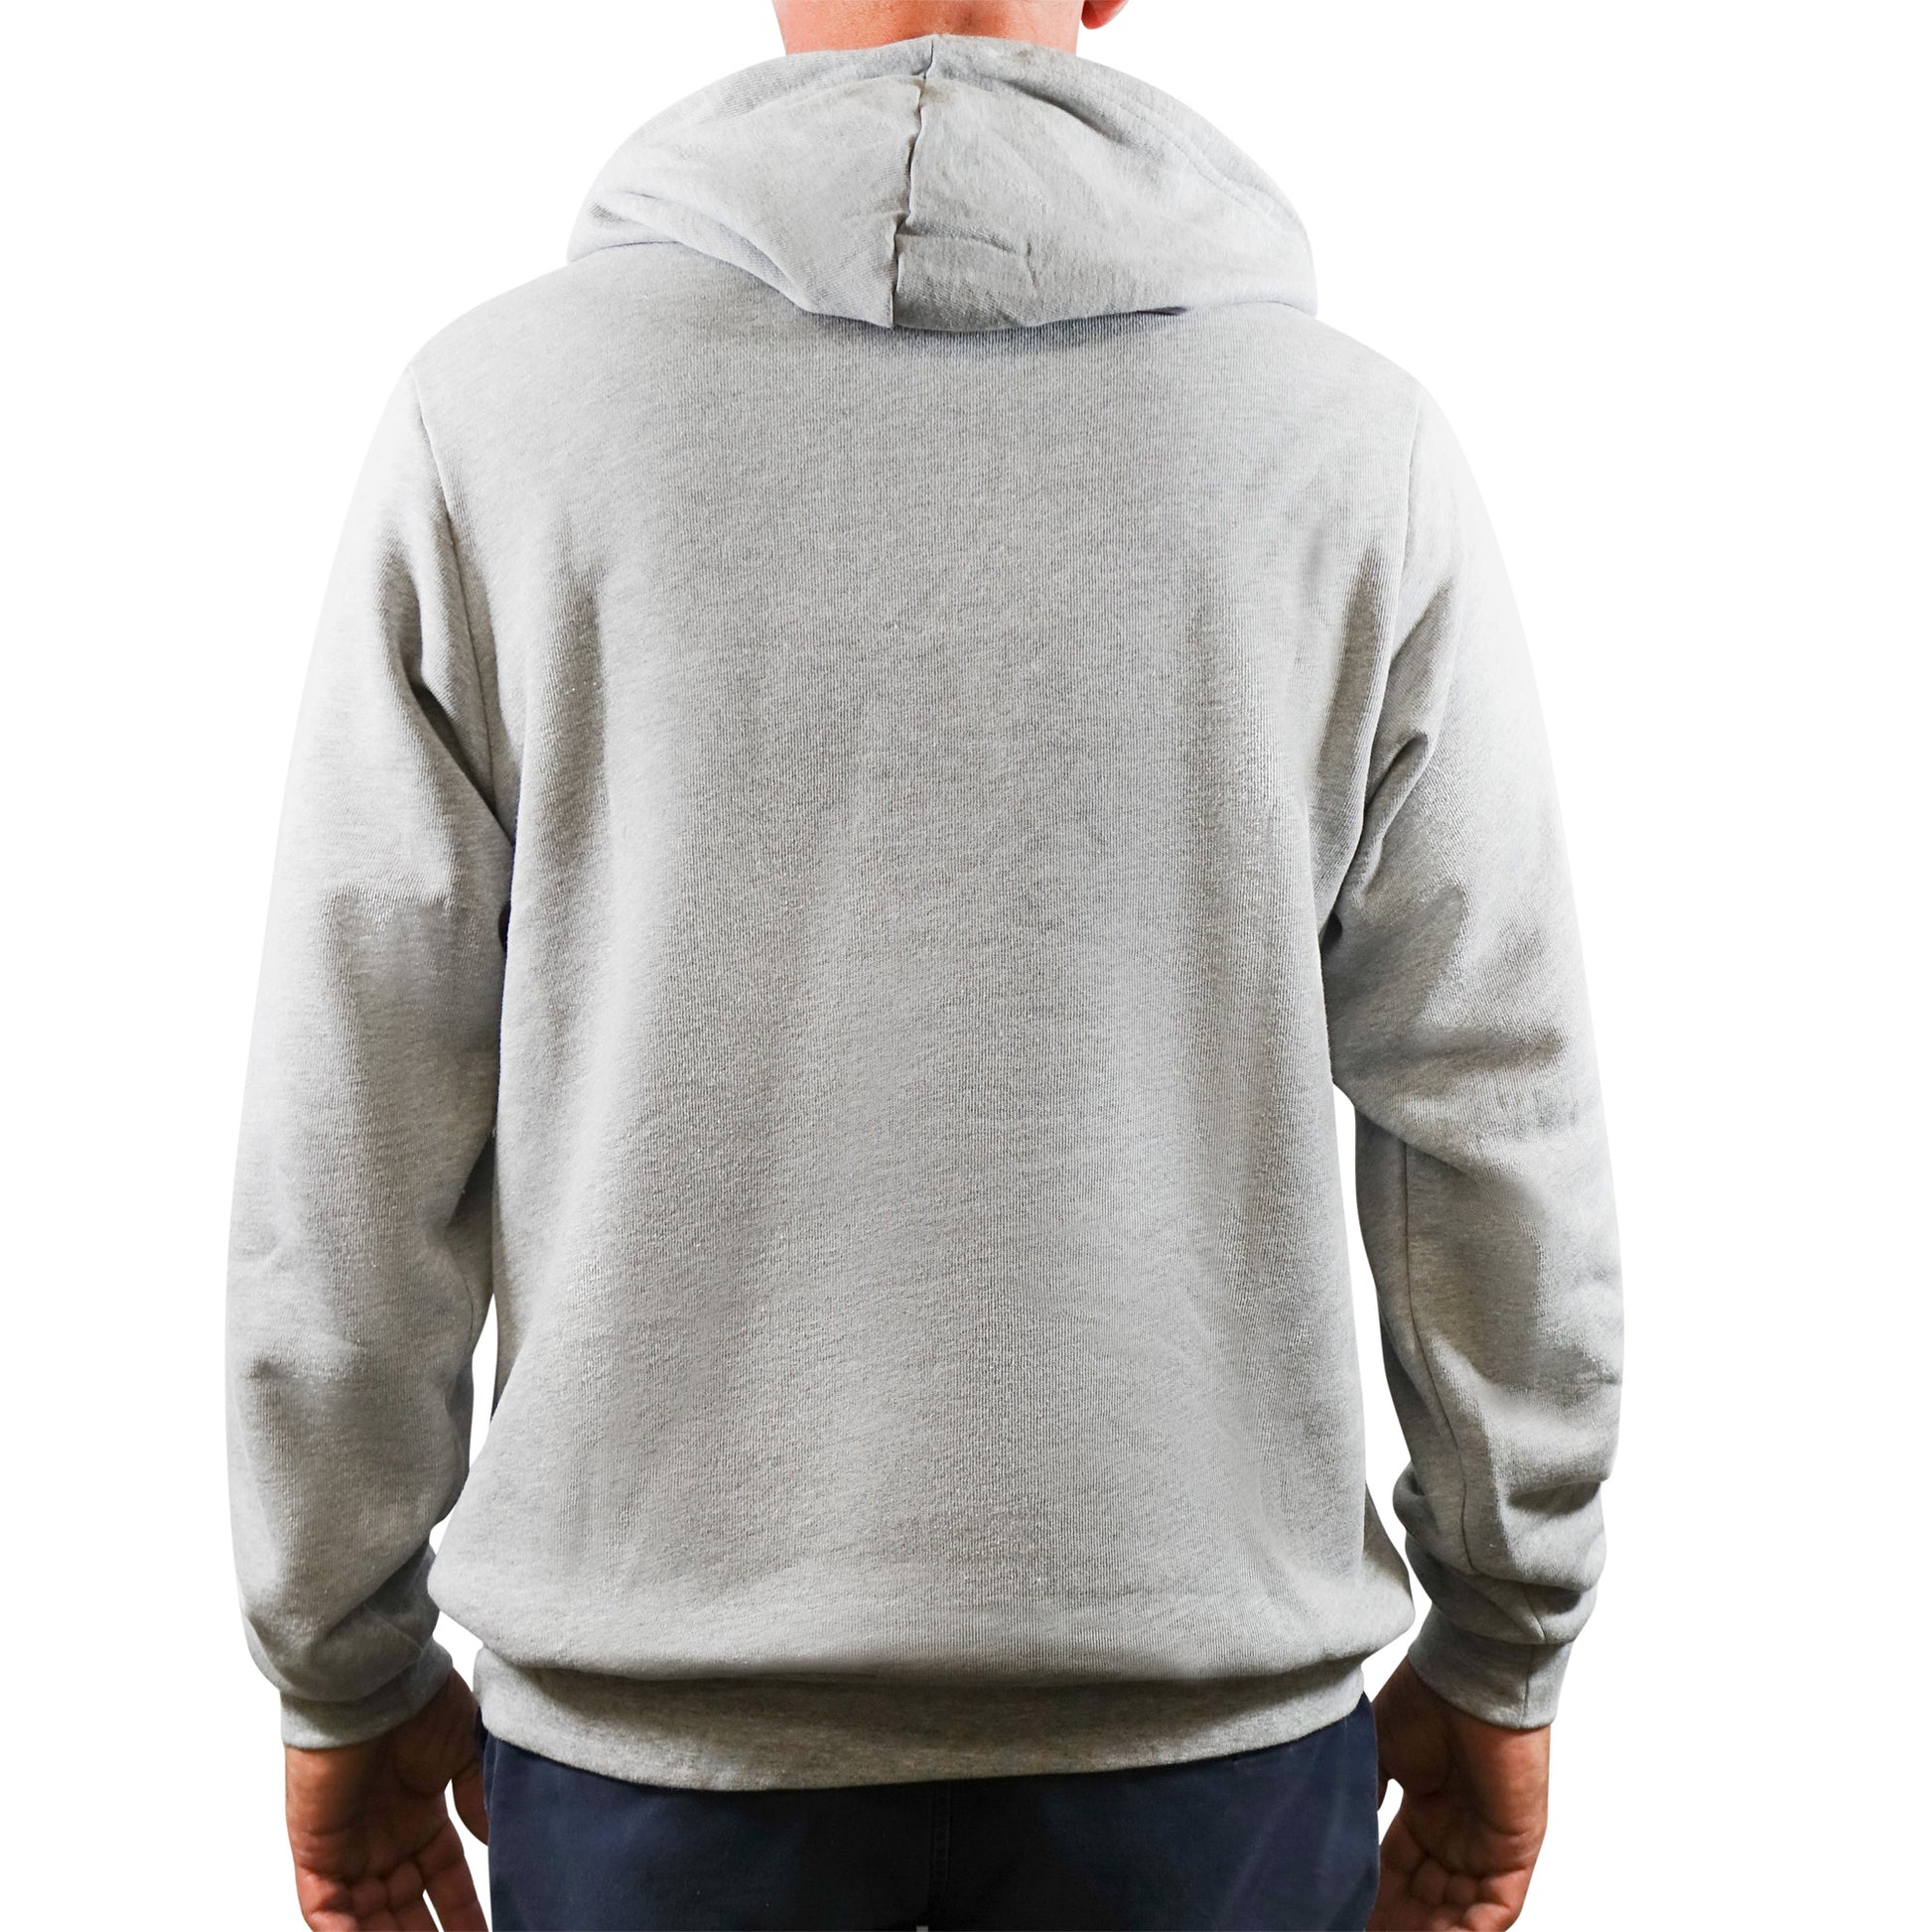 The back view of a man wearing a Mainers Hoodie - Mainers.